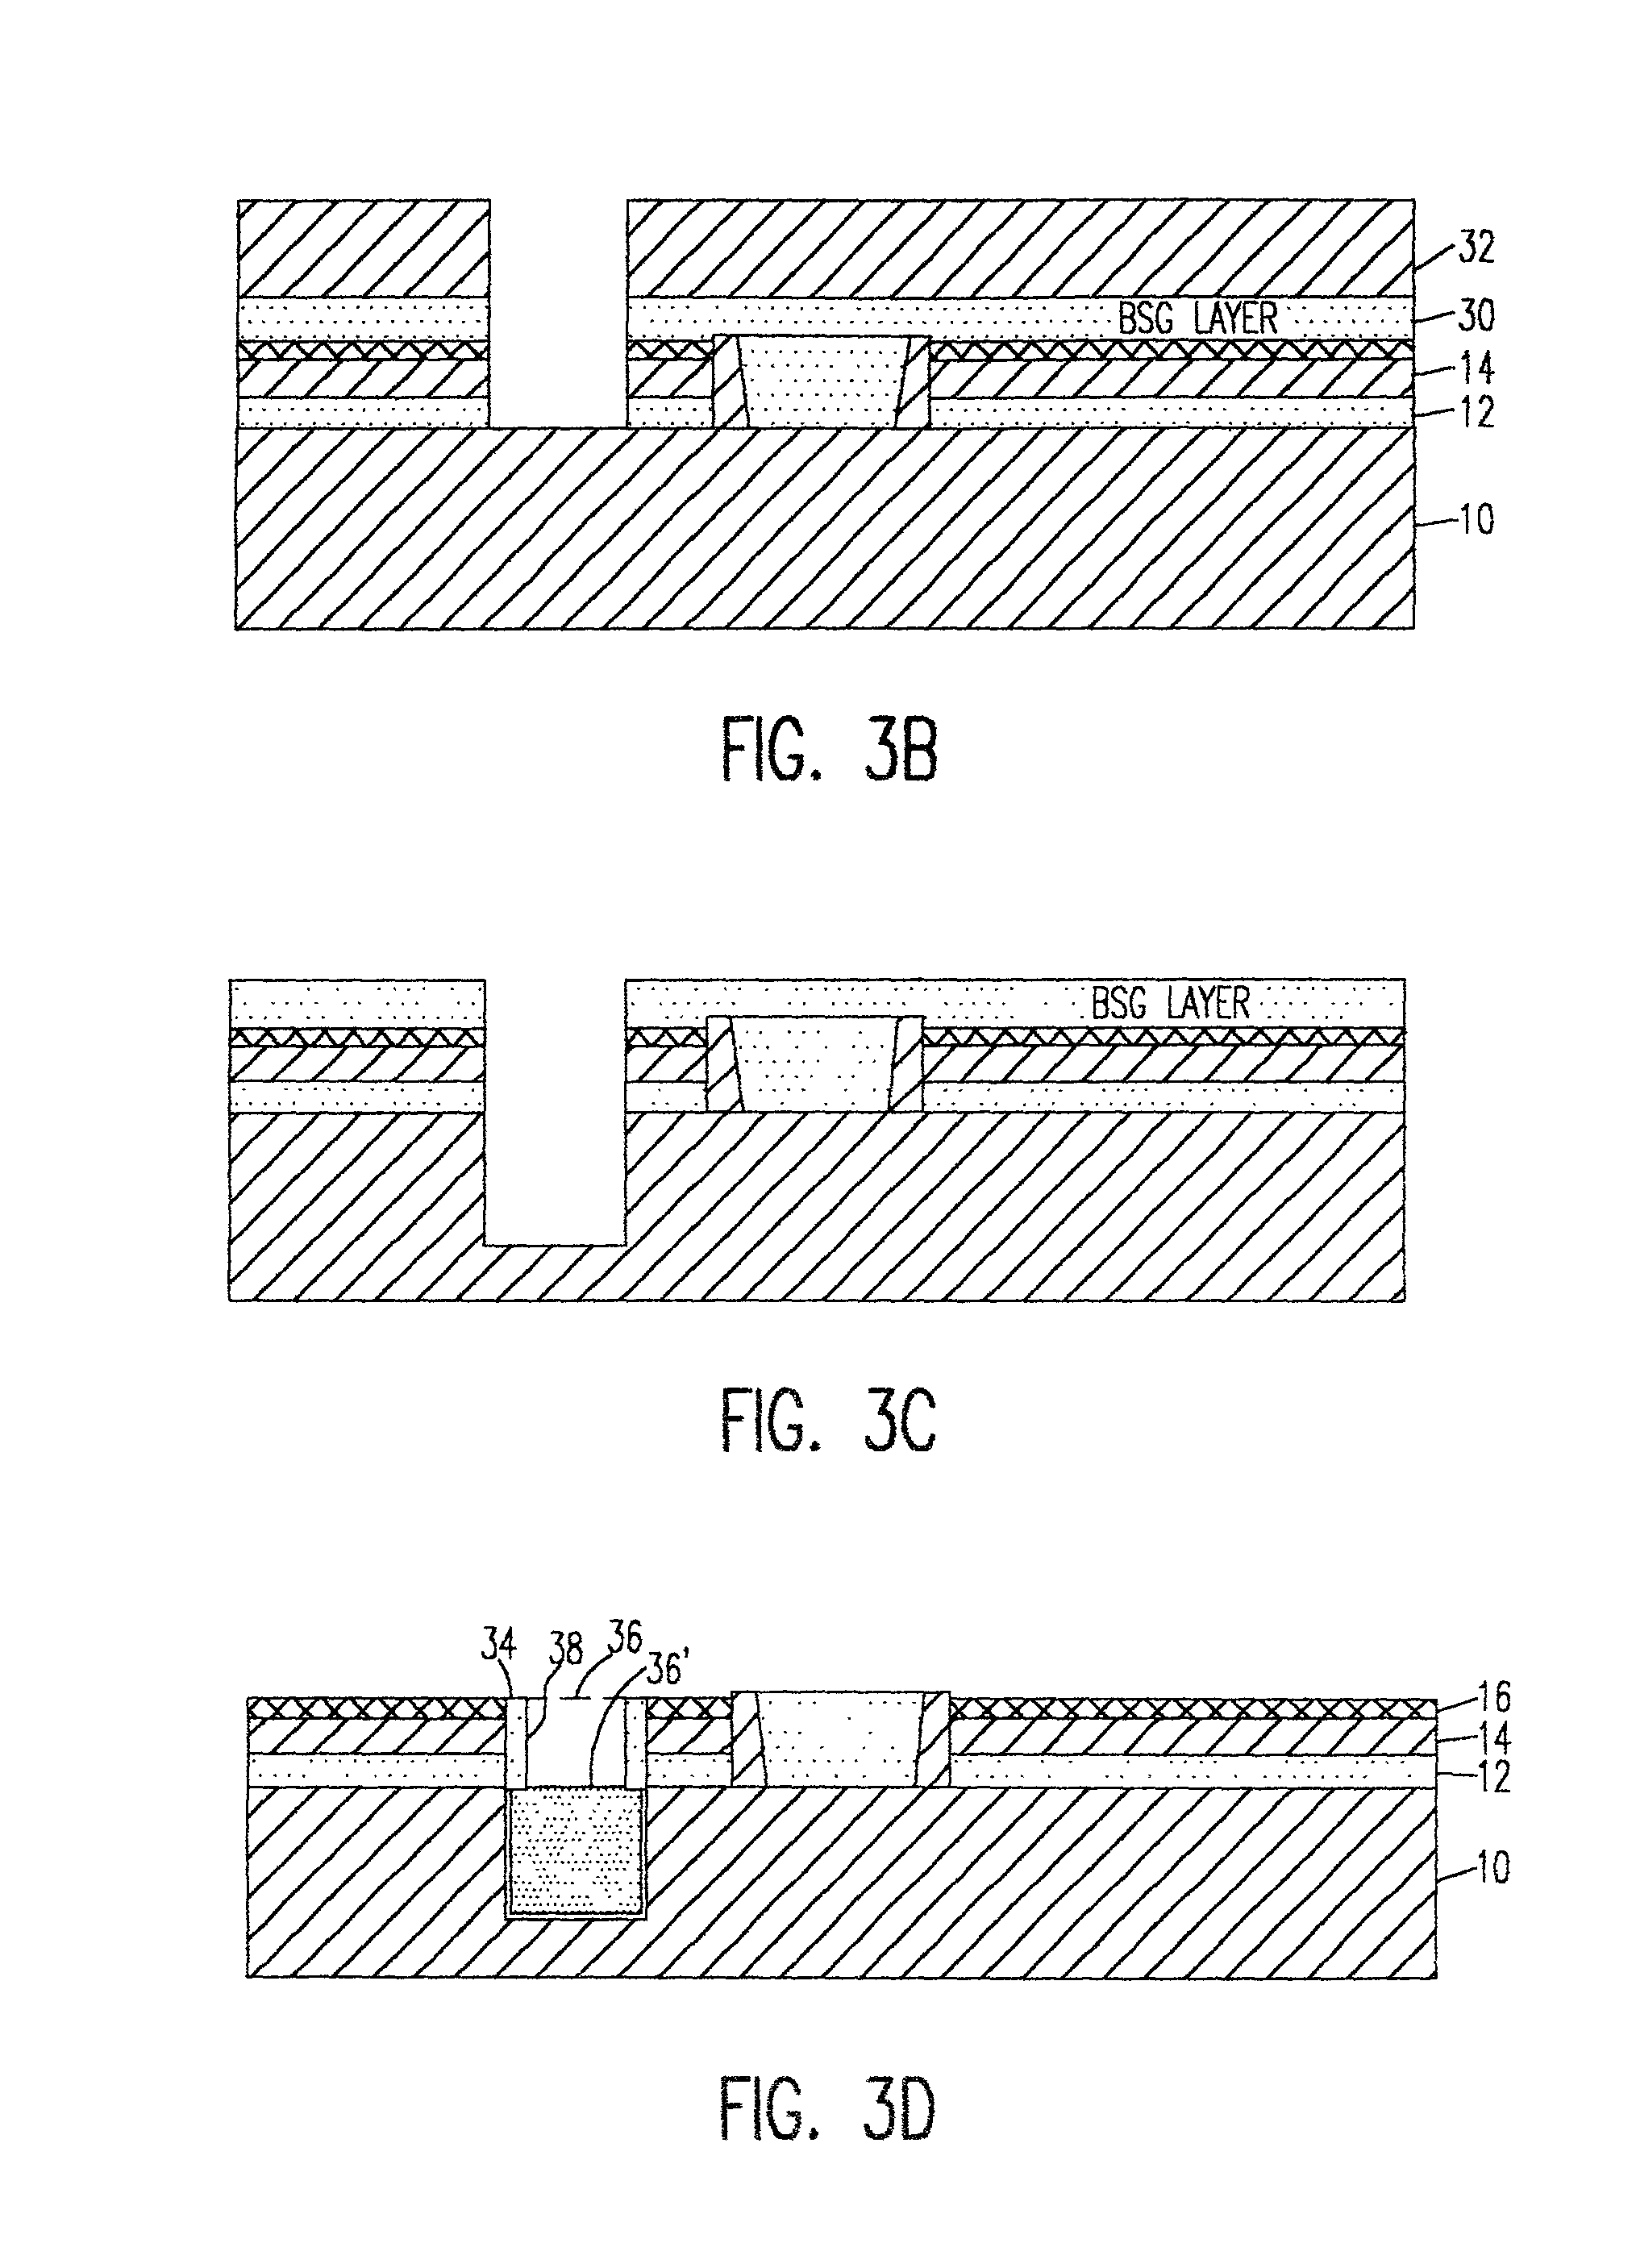 Structures and methods of anti-fuse formation in SOI